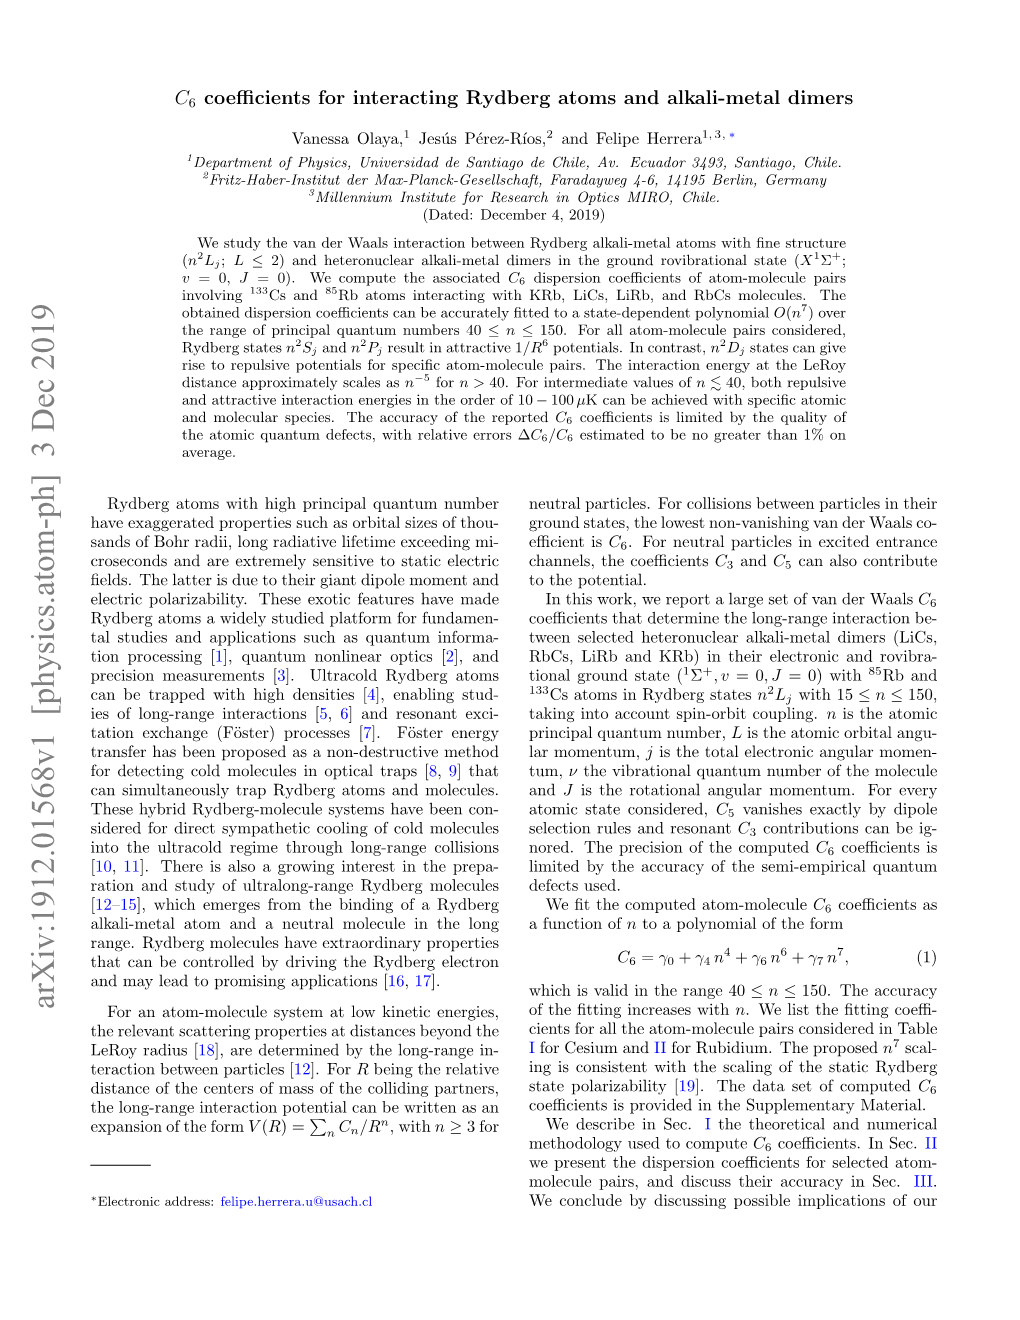 $ C 6 $ Coefficients for Interacting Rydberg Atoms and Alkali-Metal